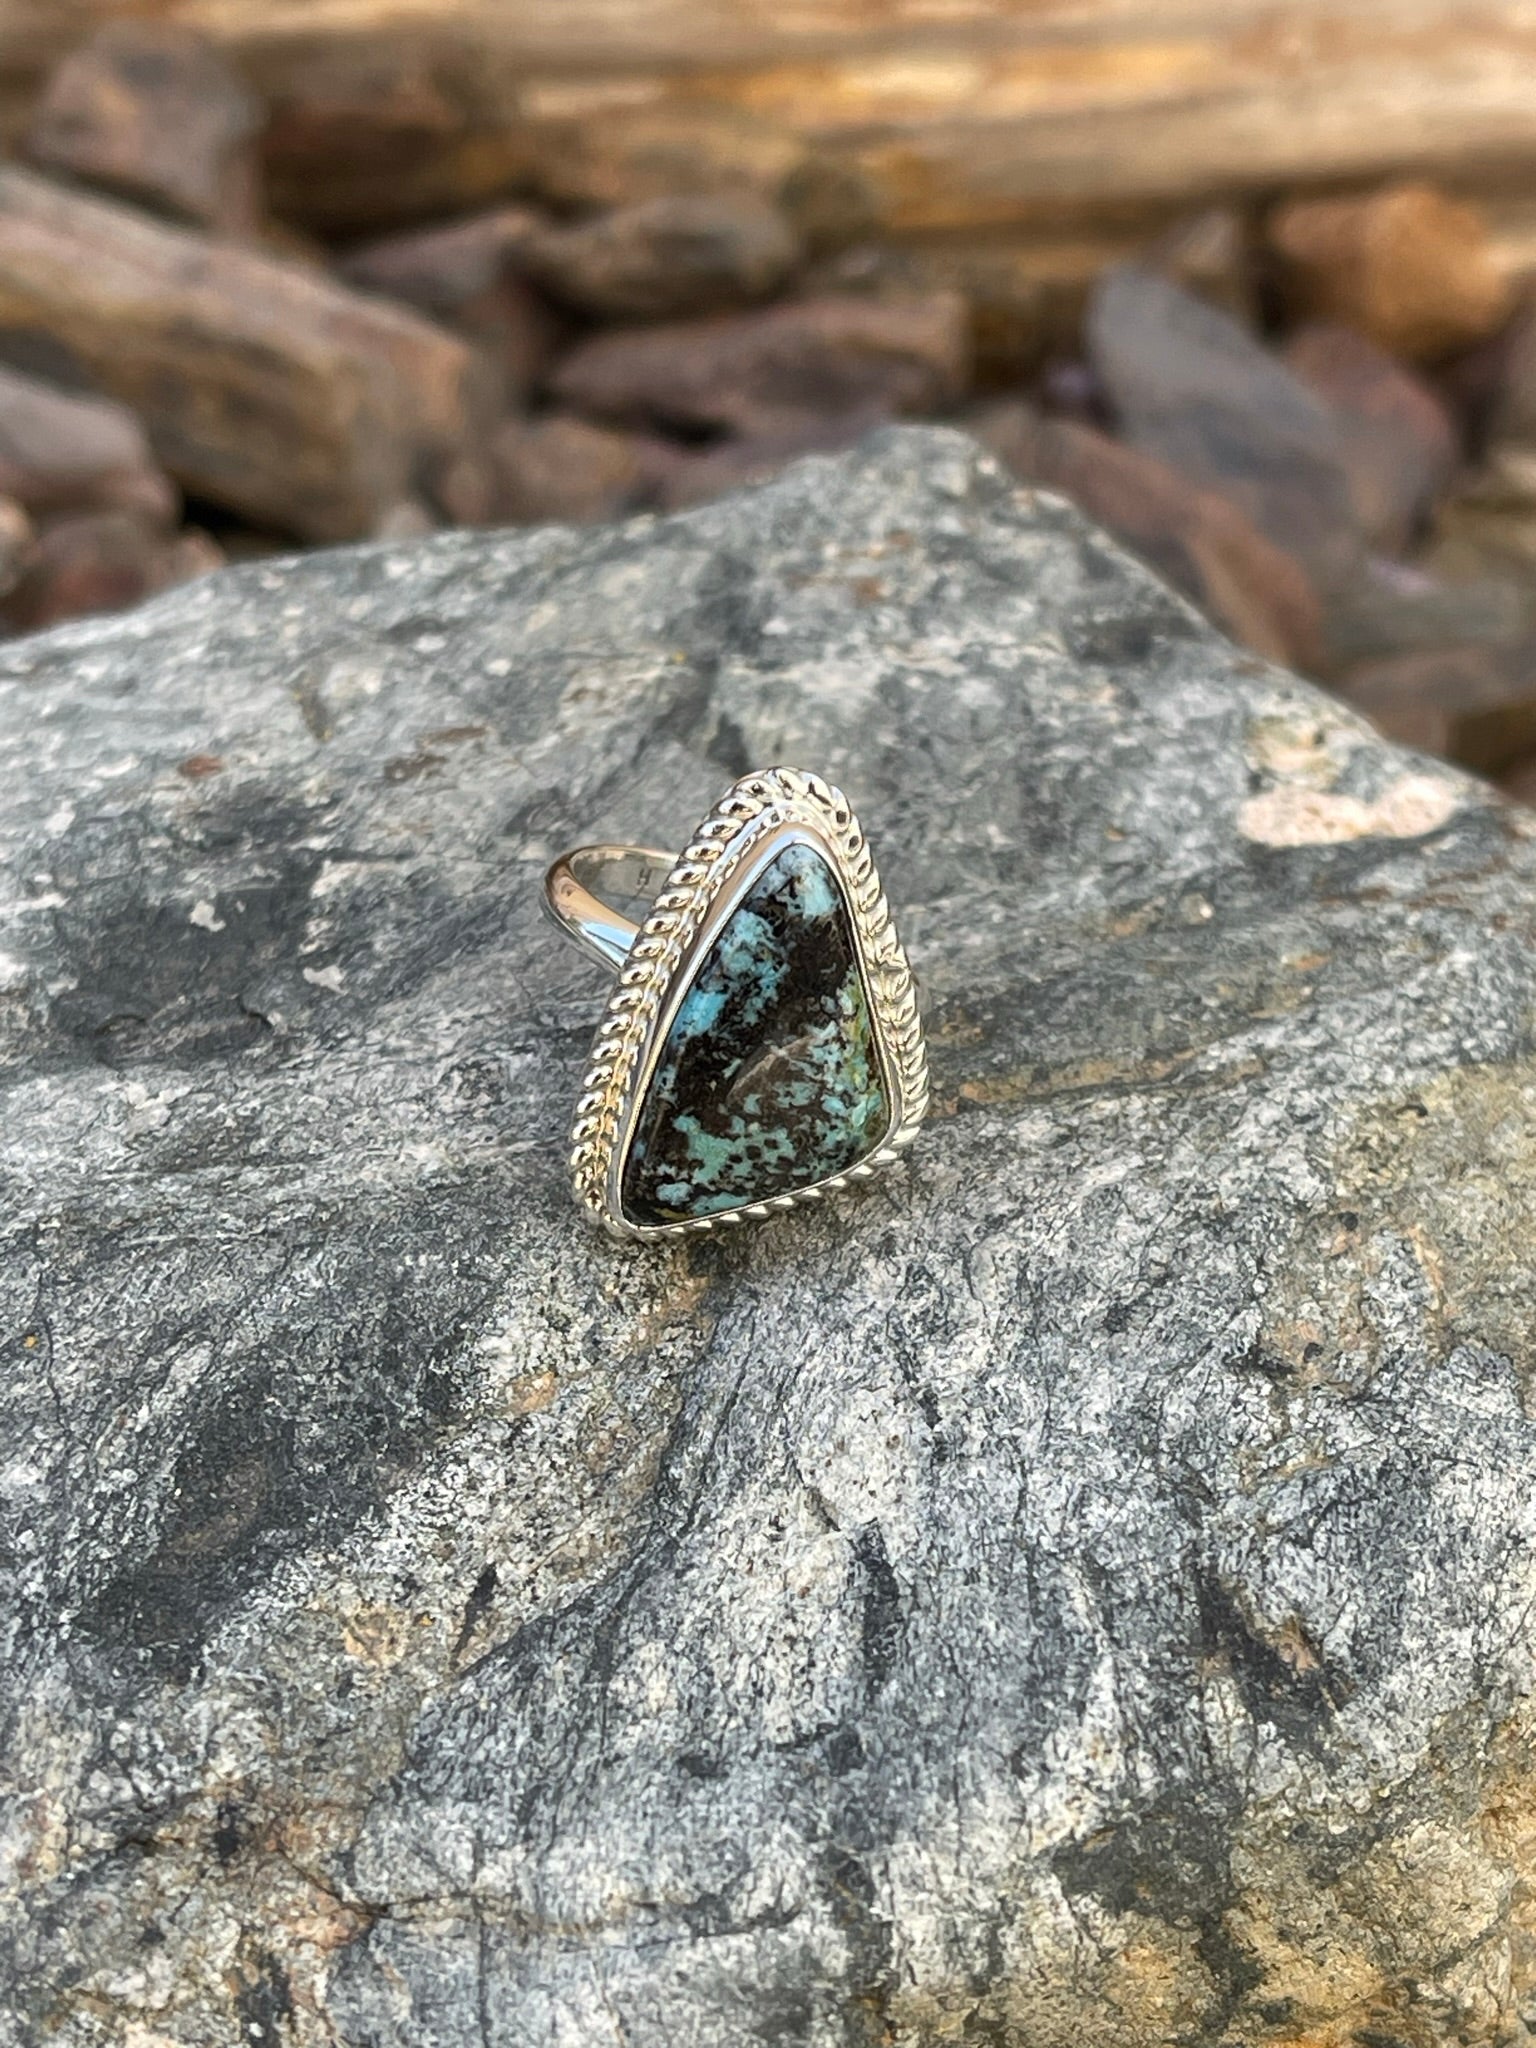 Handmade Sterling Silver Stormy Mountain Turquoise Ring with Twist Trim - Size 8